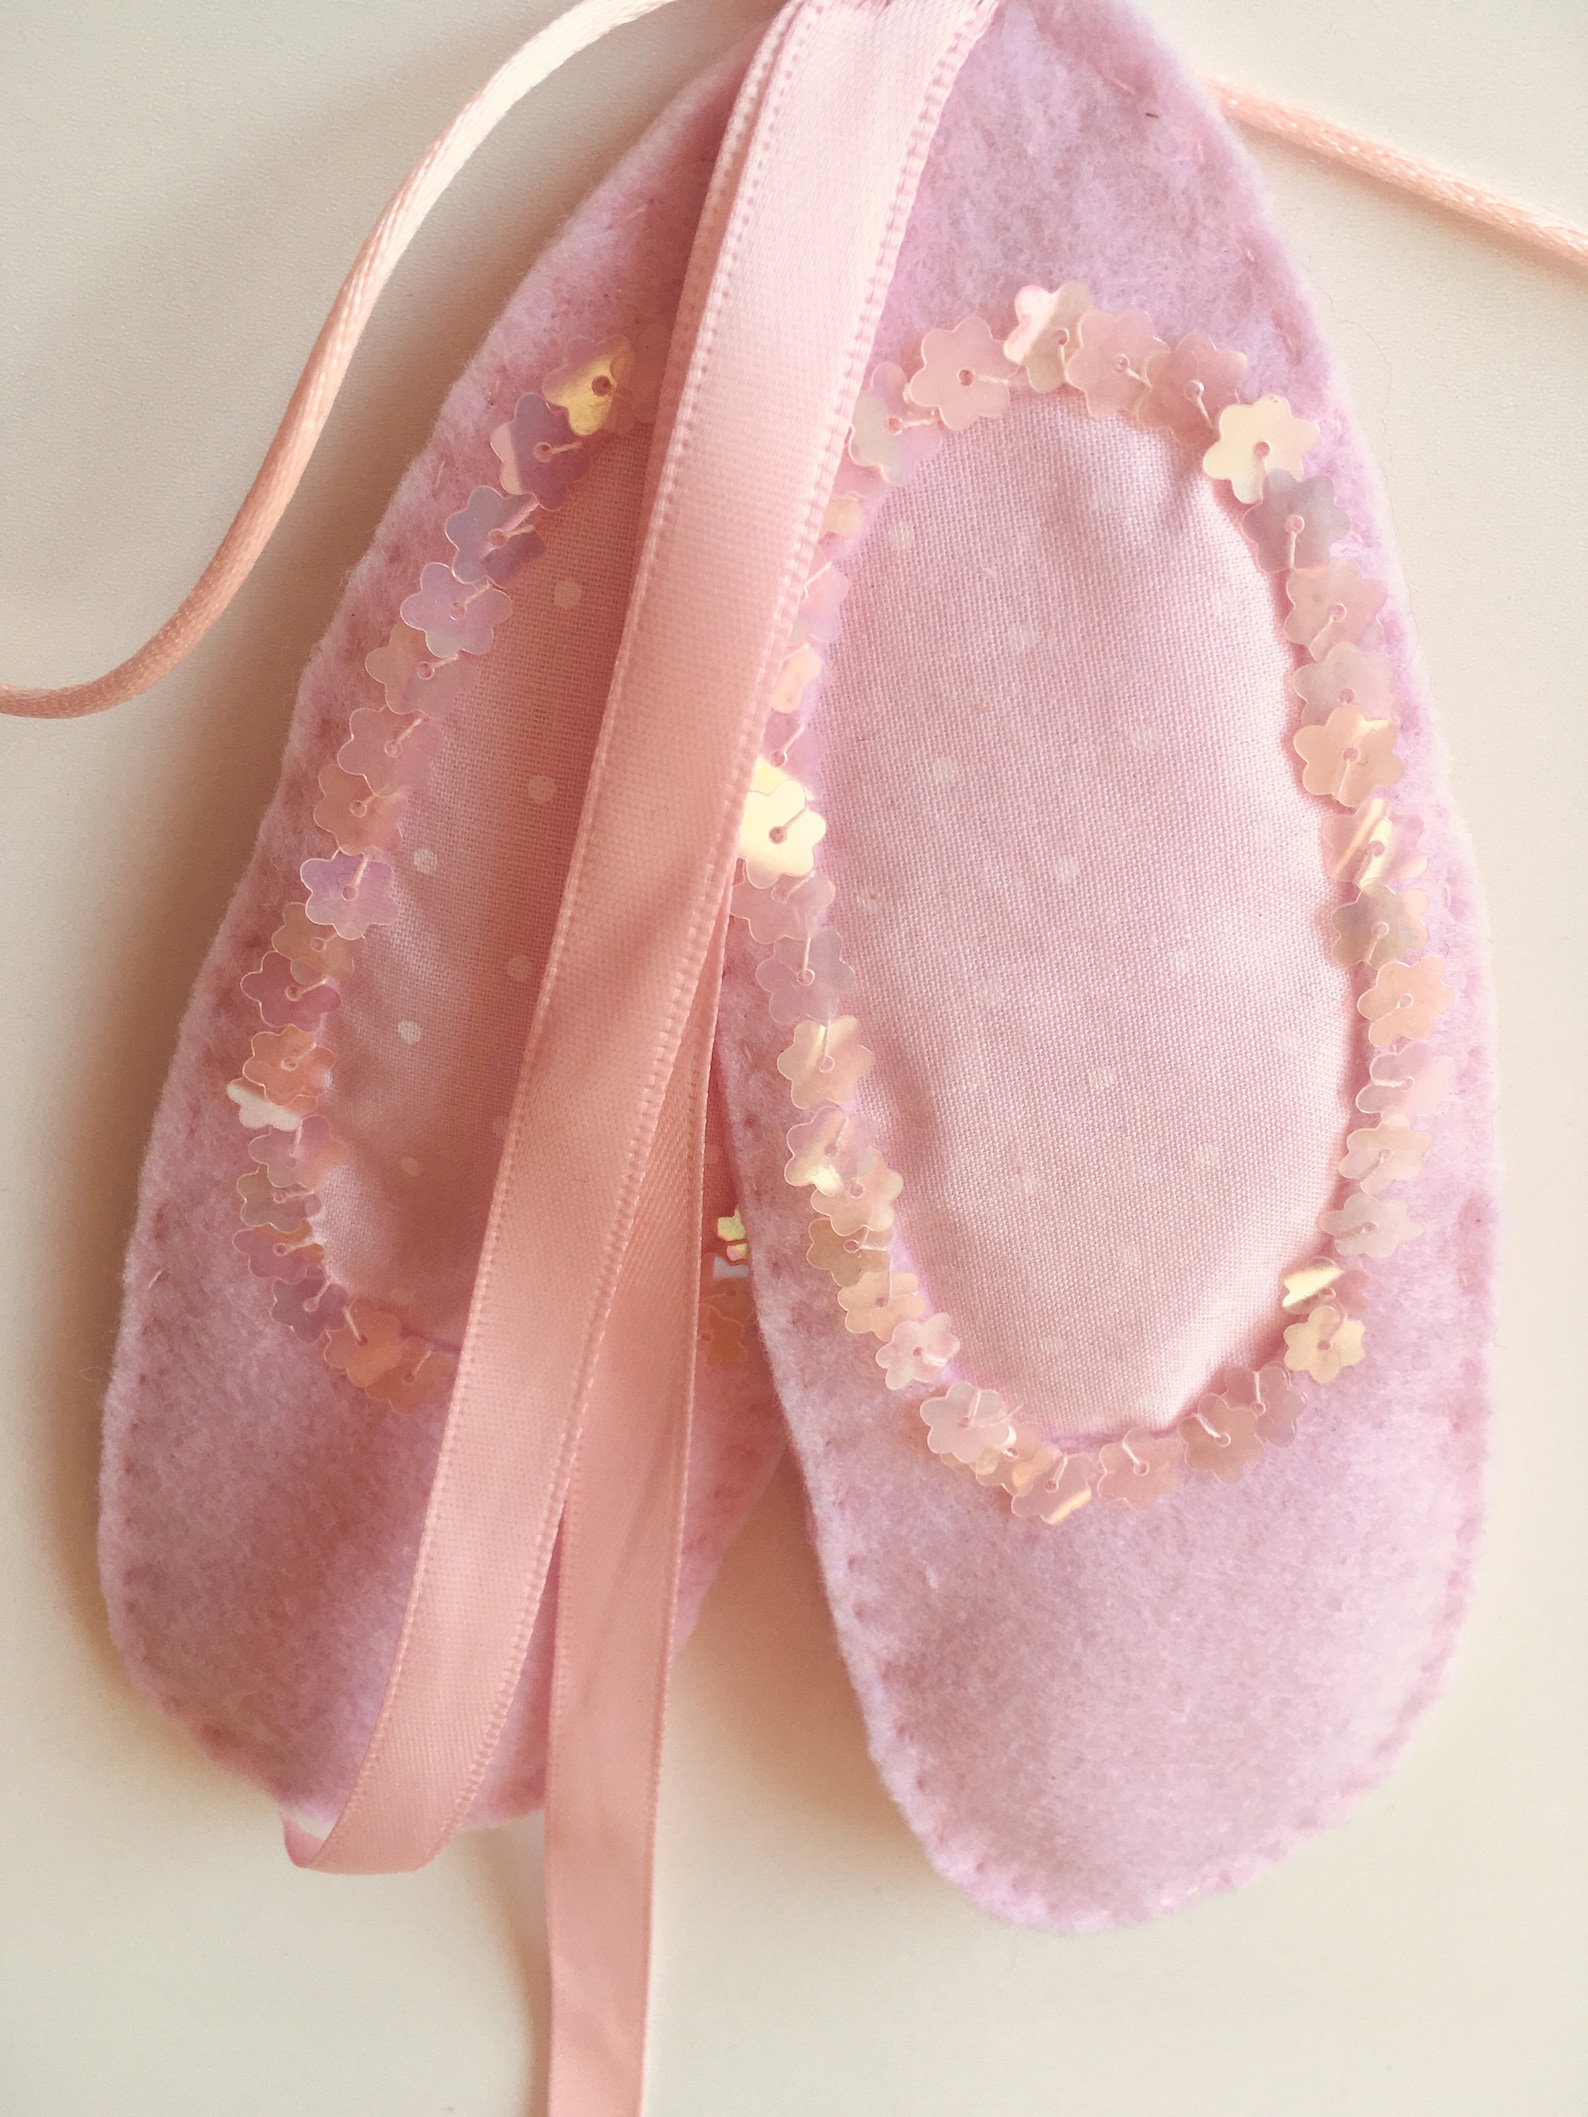 ballet shoes bunting,free postage within the uk